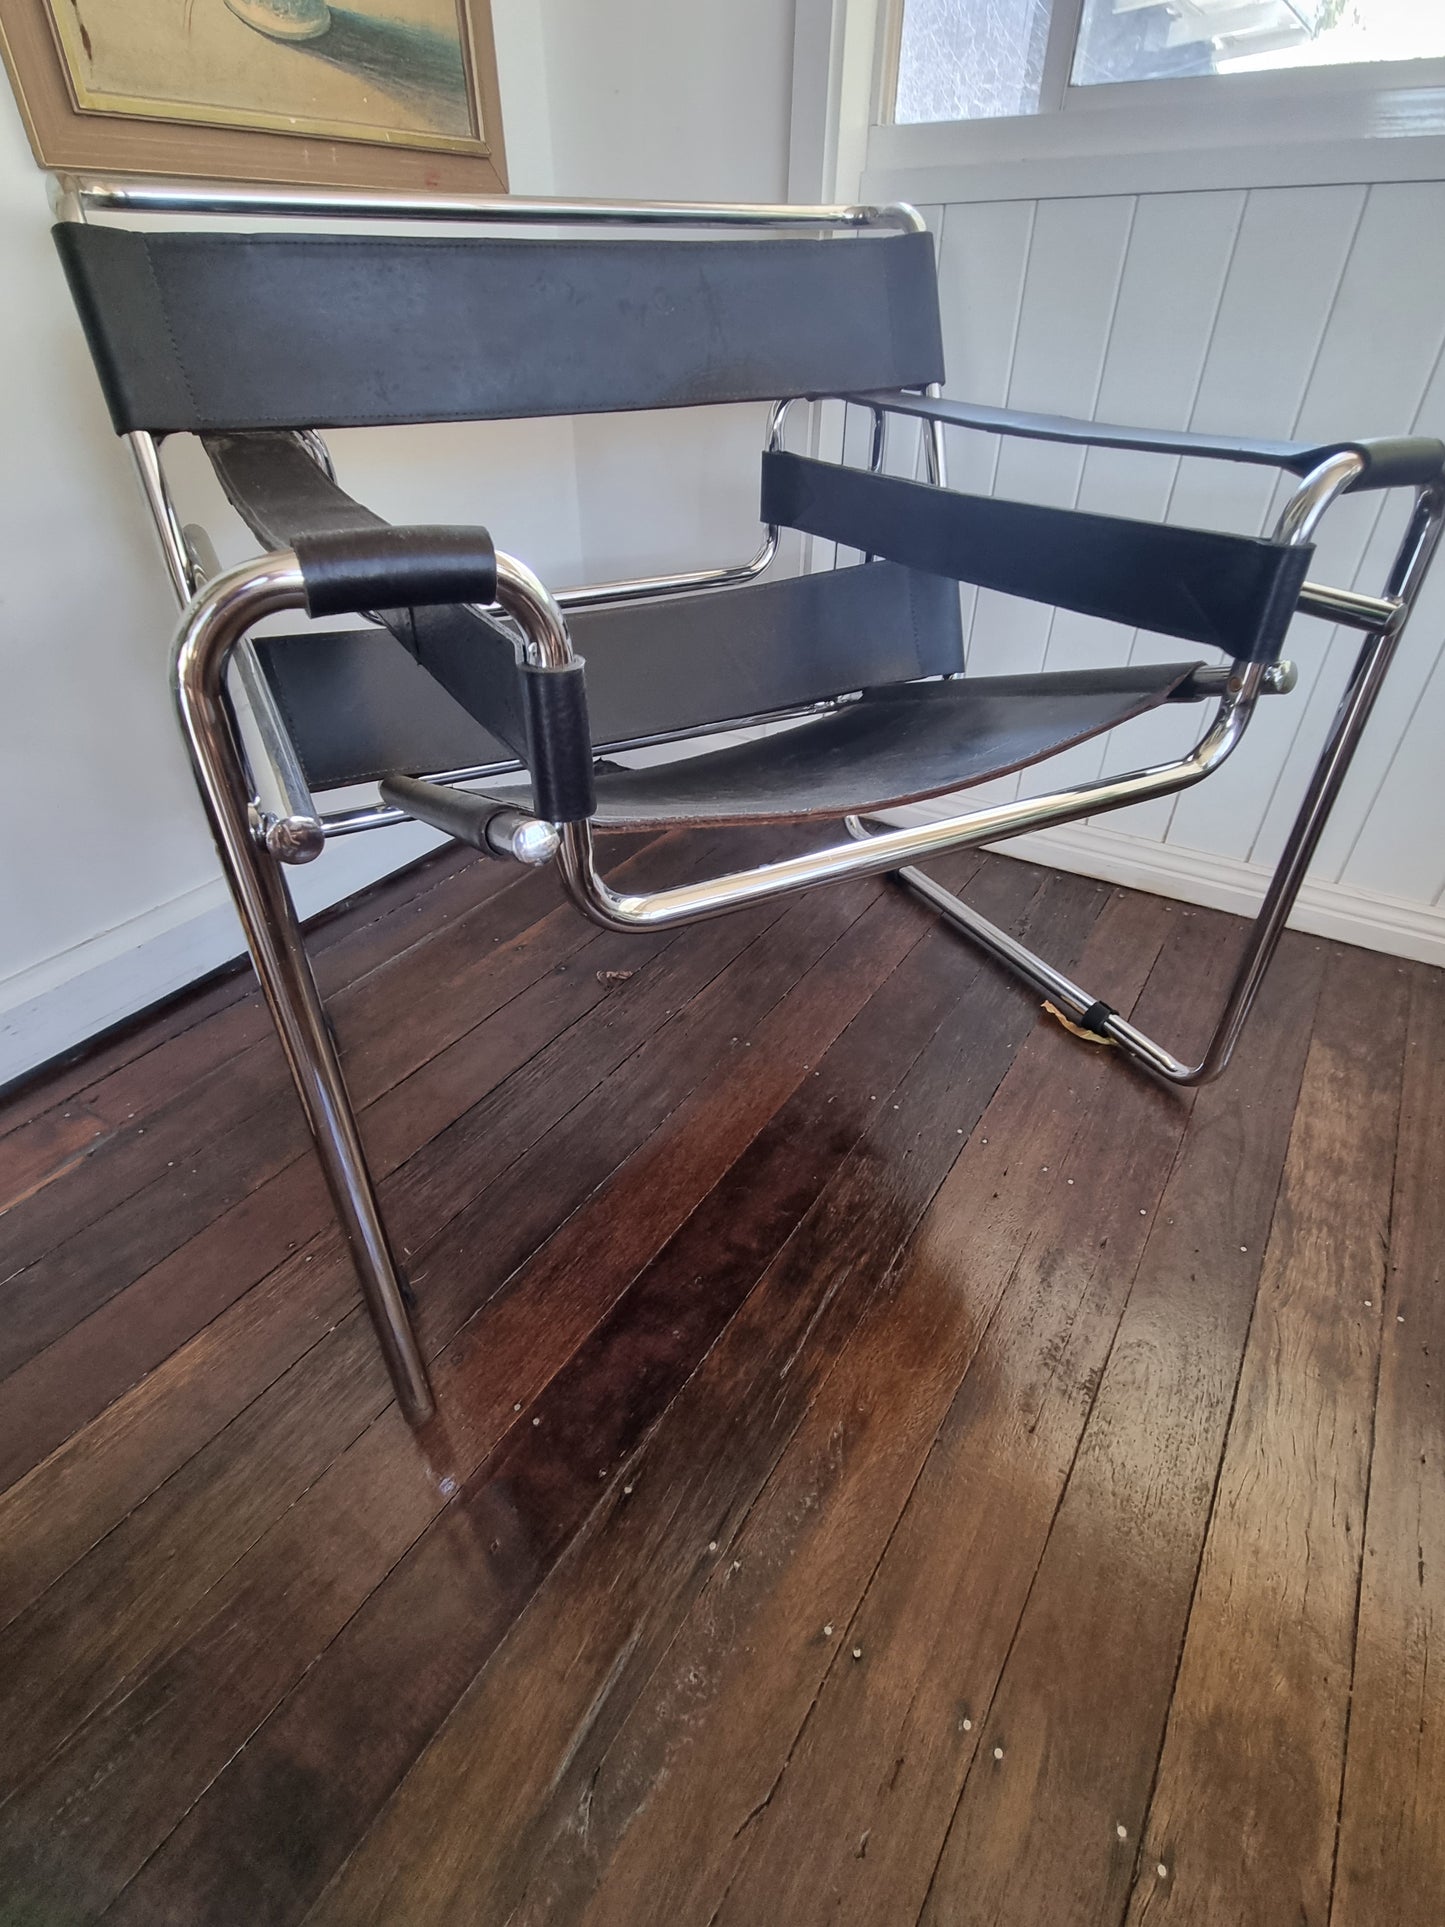 Wassily bruer chair knoll 70's